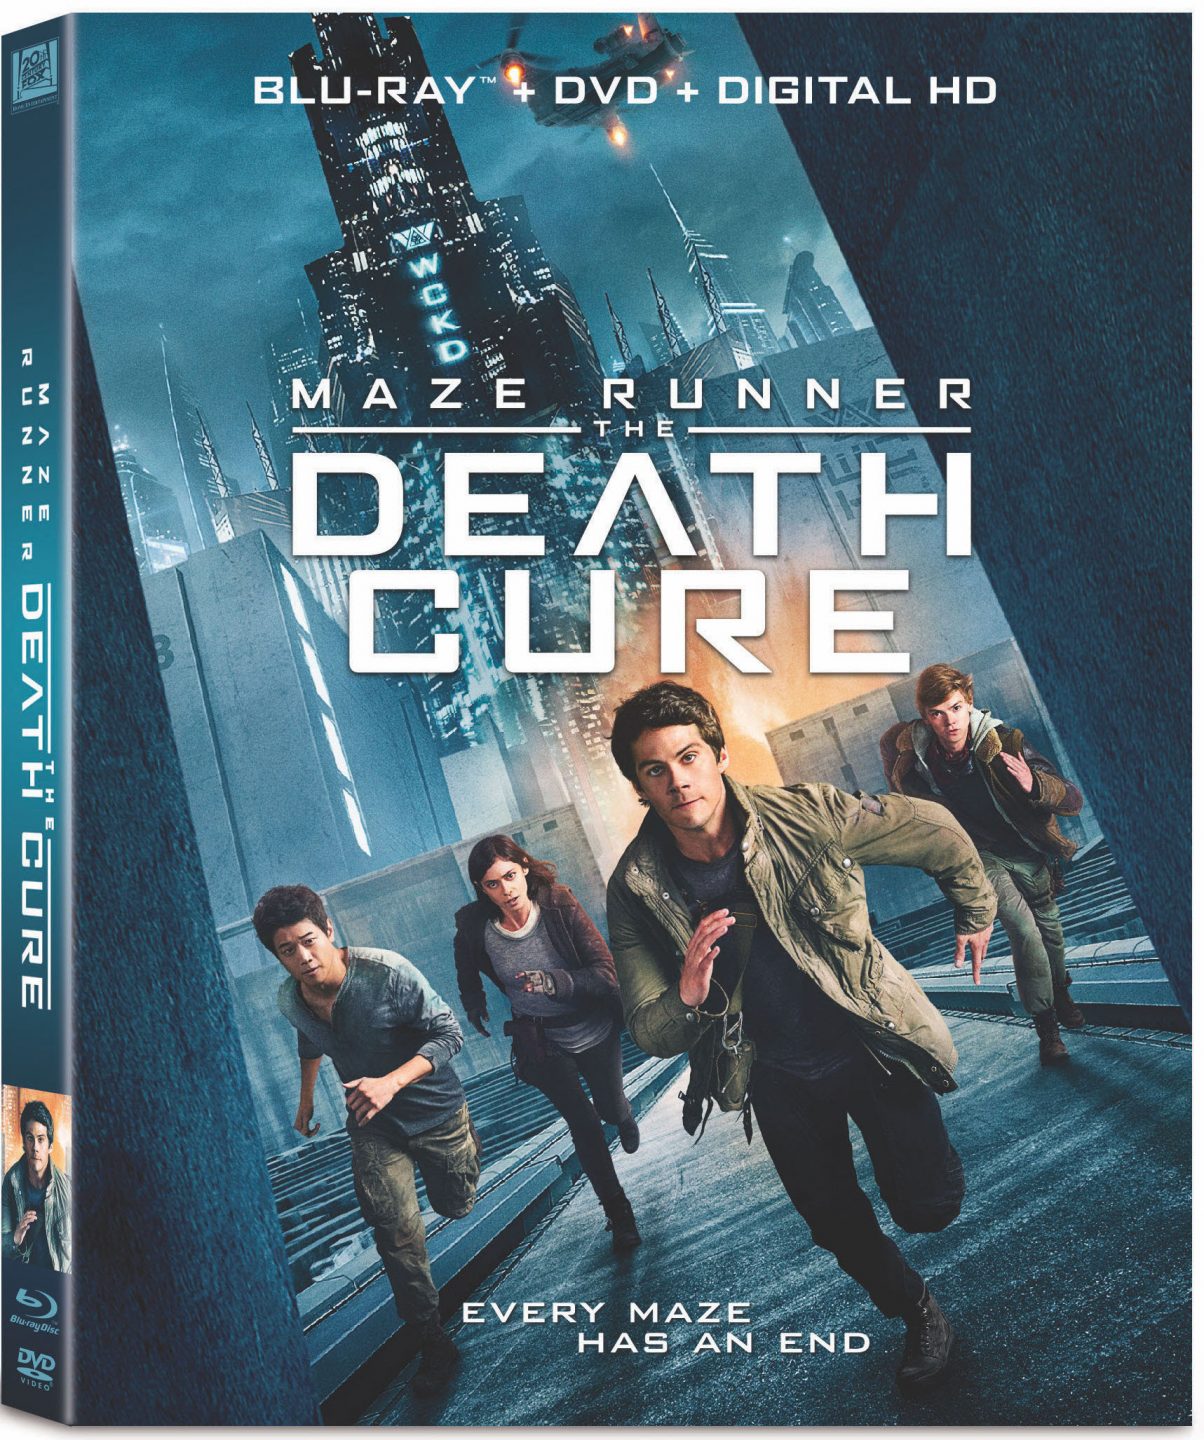 Maze Runner: The Death Cure Blu-Ray Combo Cover (20th Century Fox Home Entertainment)